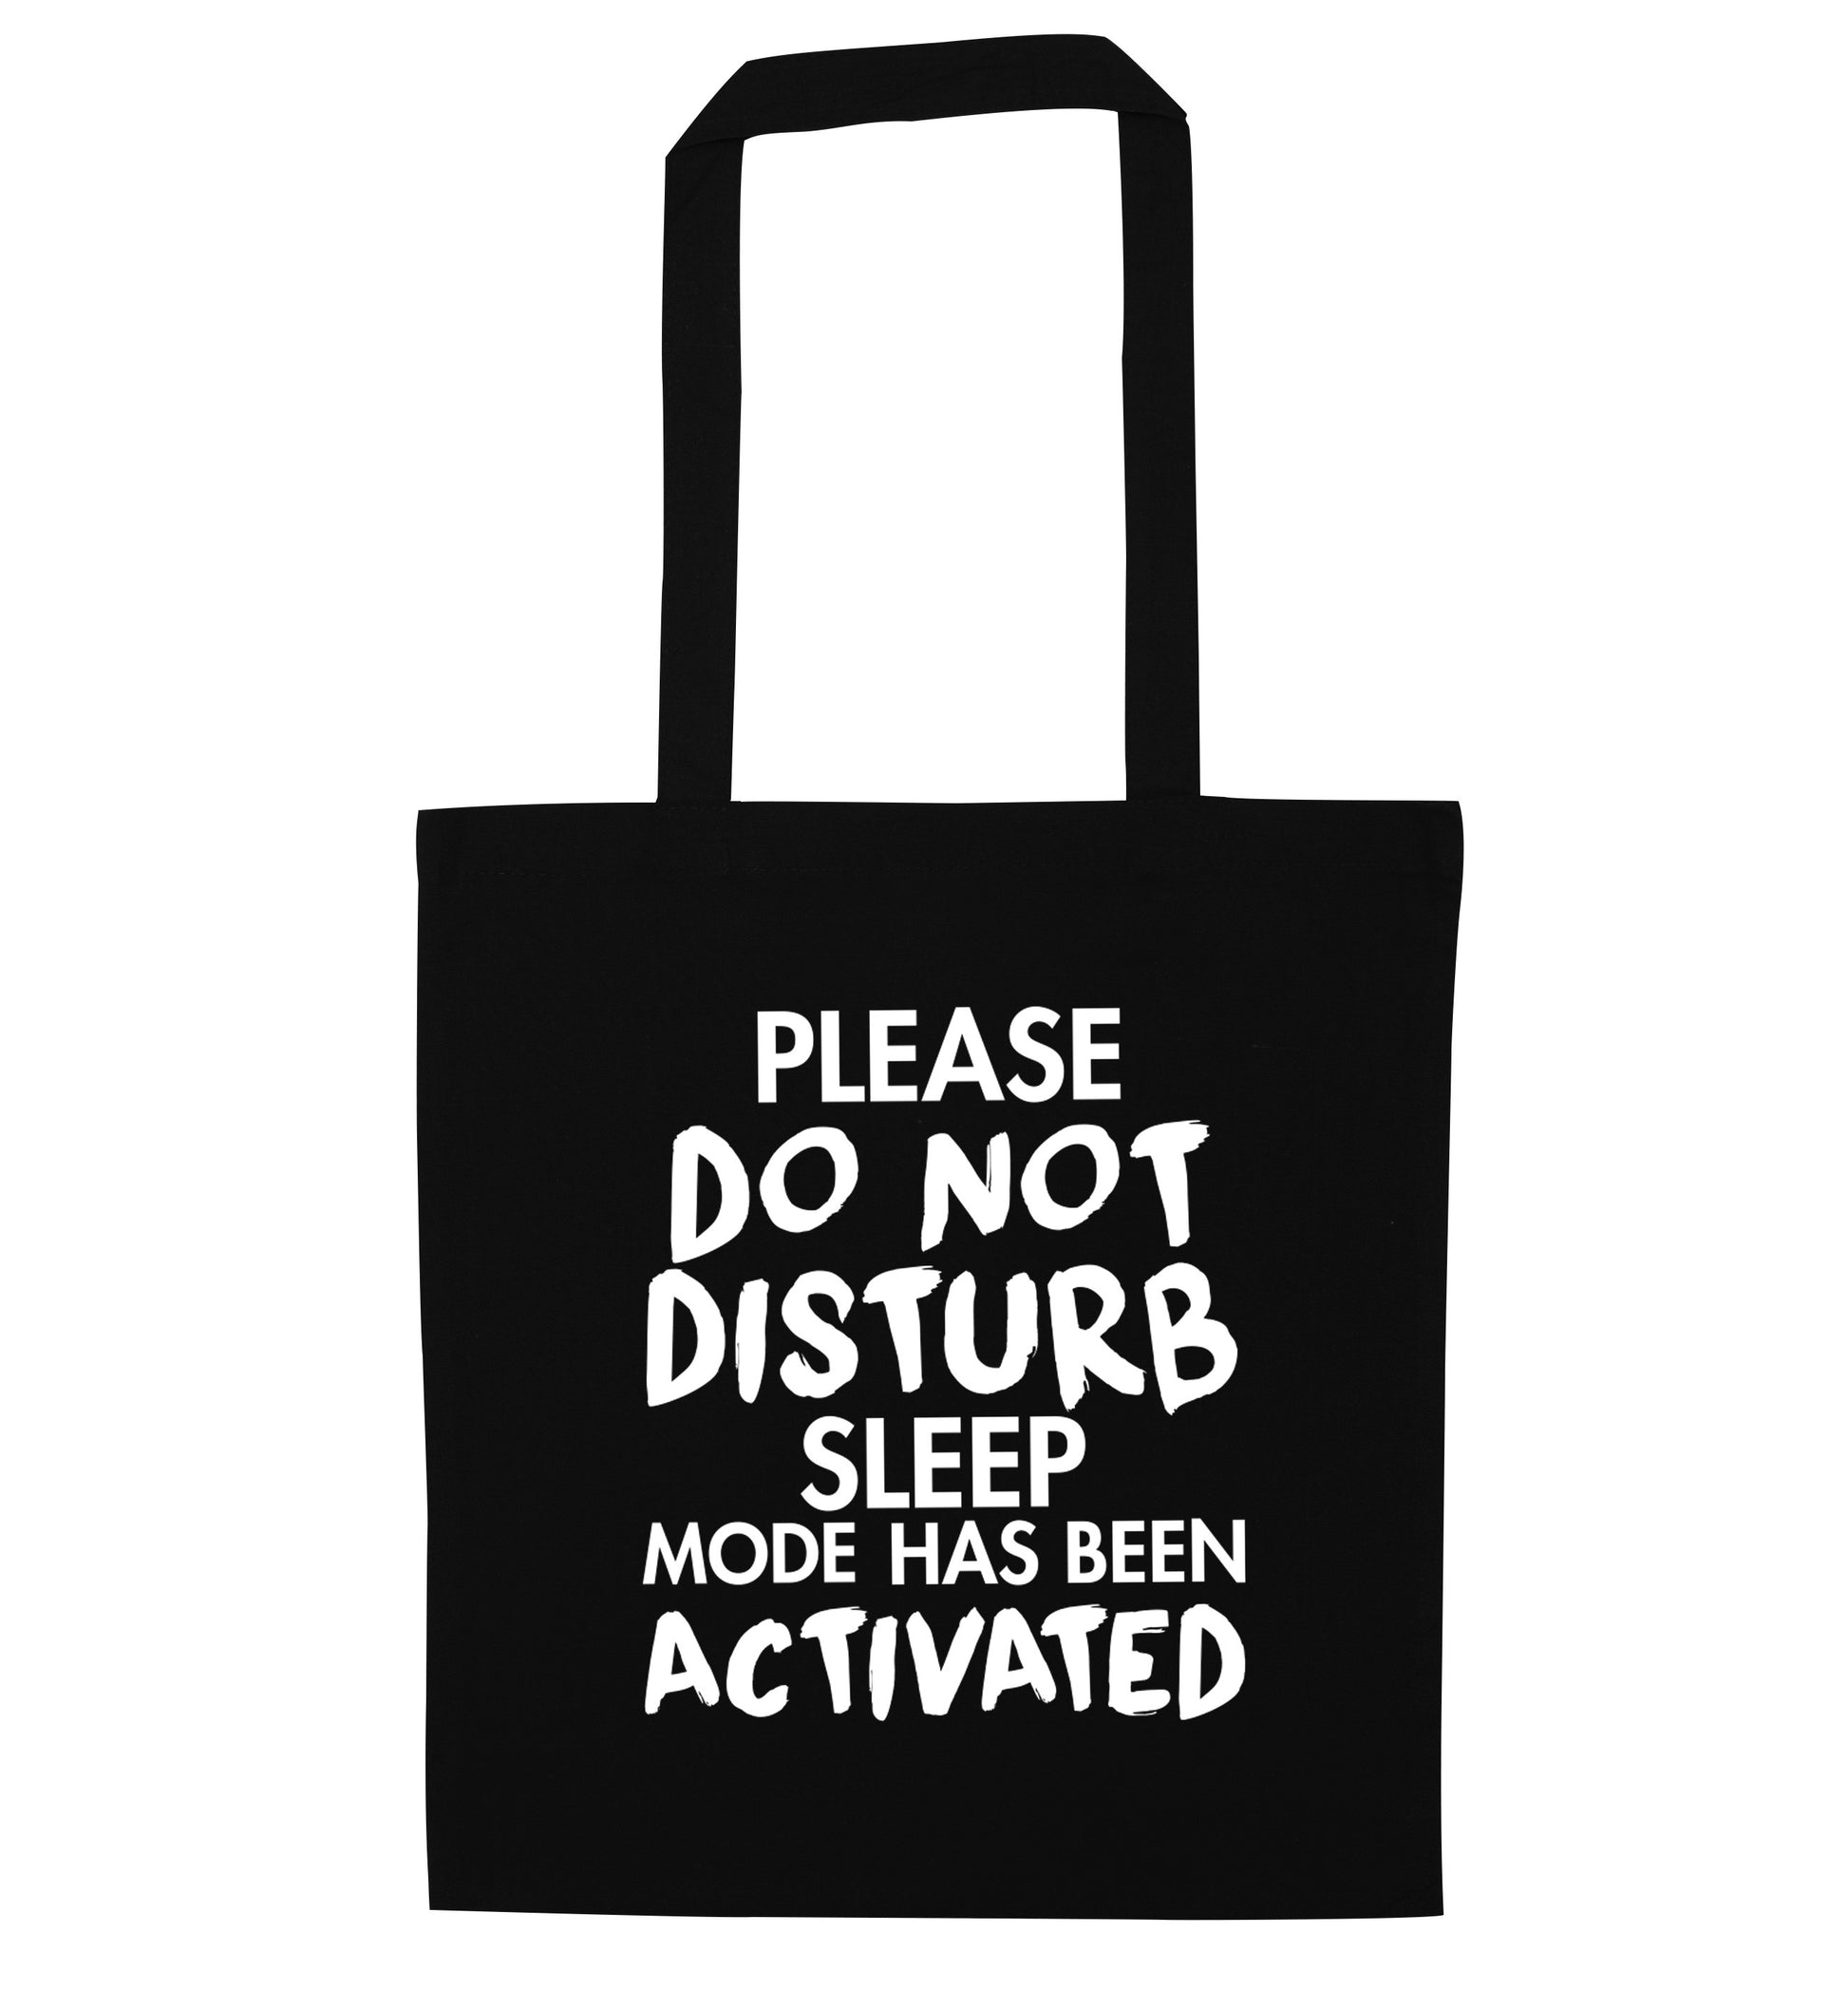 Please do not disturb sleeping mode has been activated black tote bag